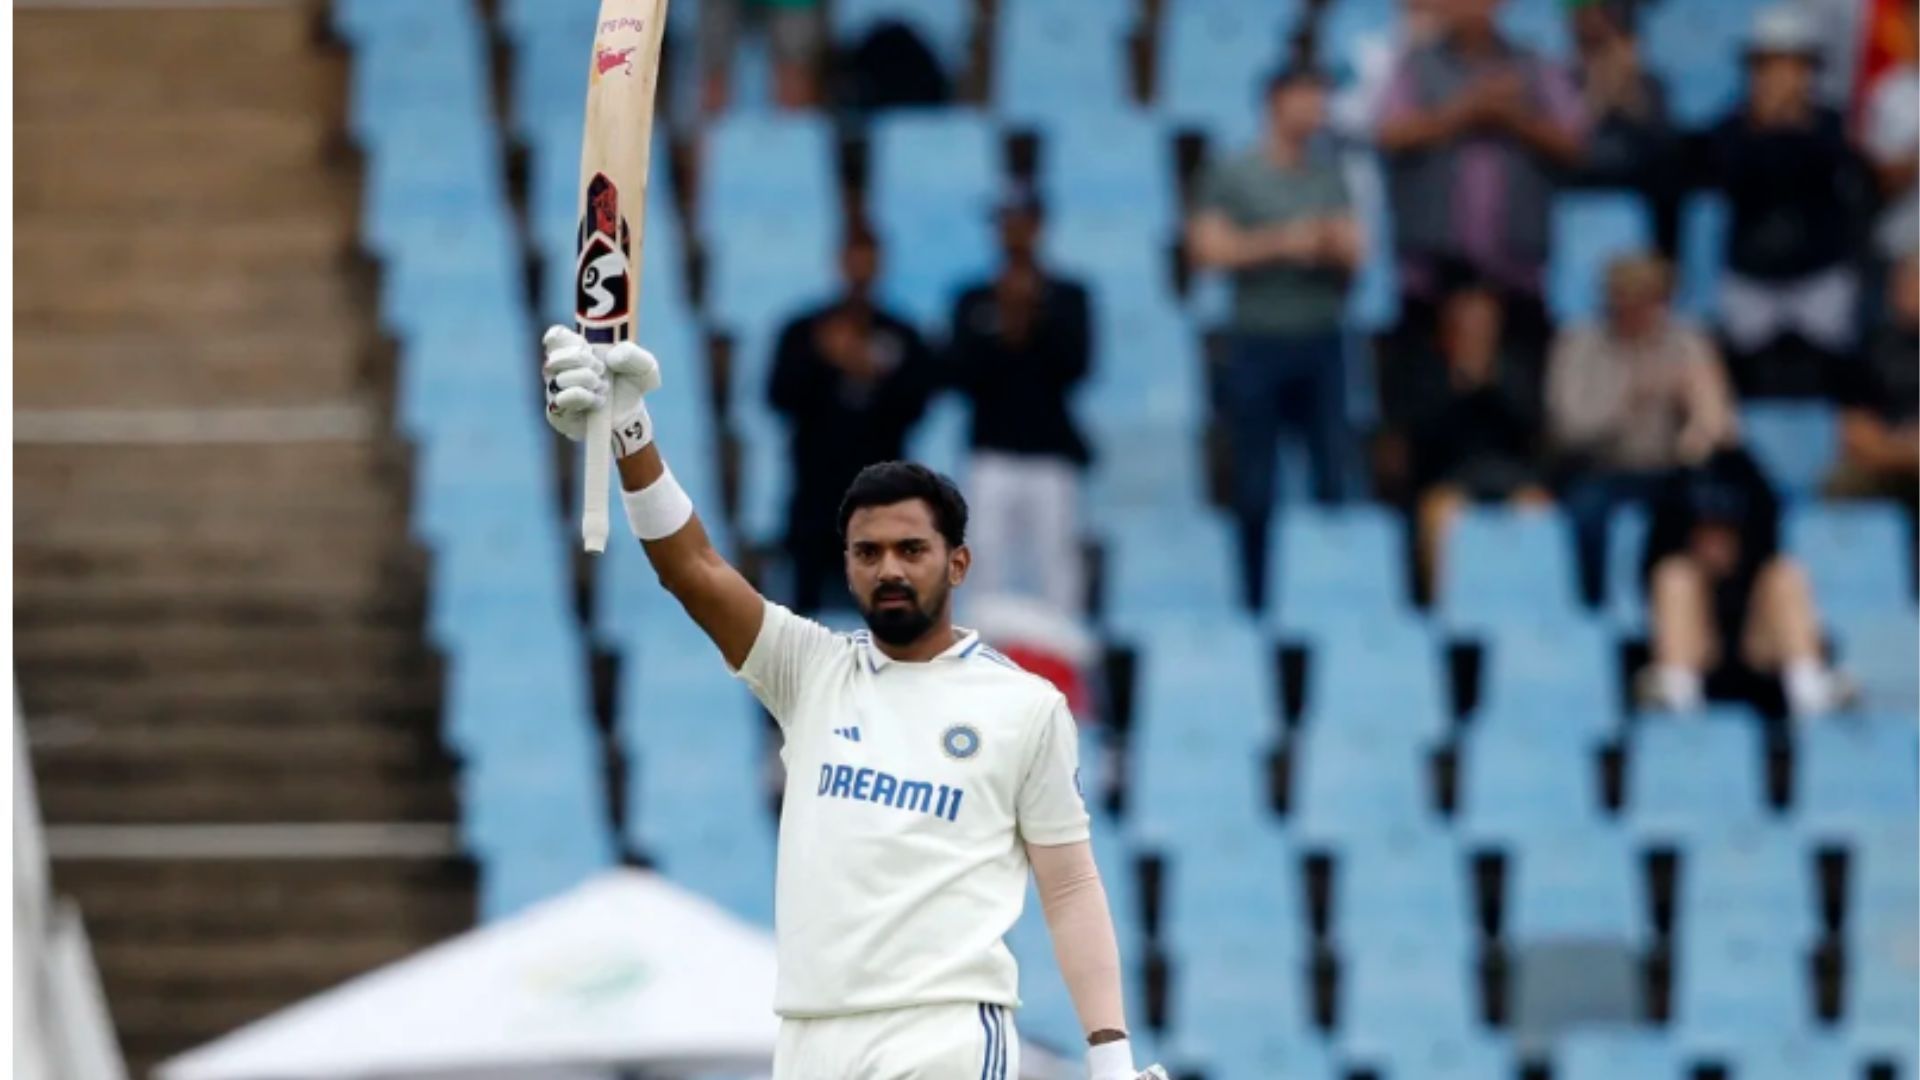 KL Rahul raises his bat after scoring his 8th Test hundred at the Supersport Park in Centurion. (Pic: Getty) 